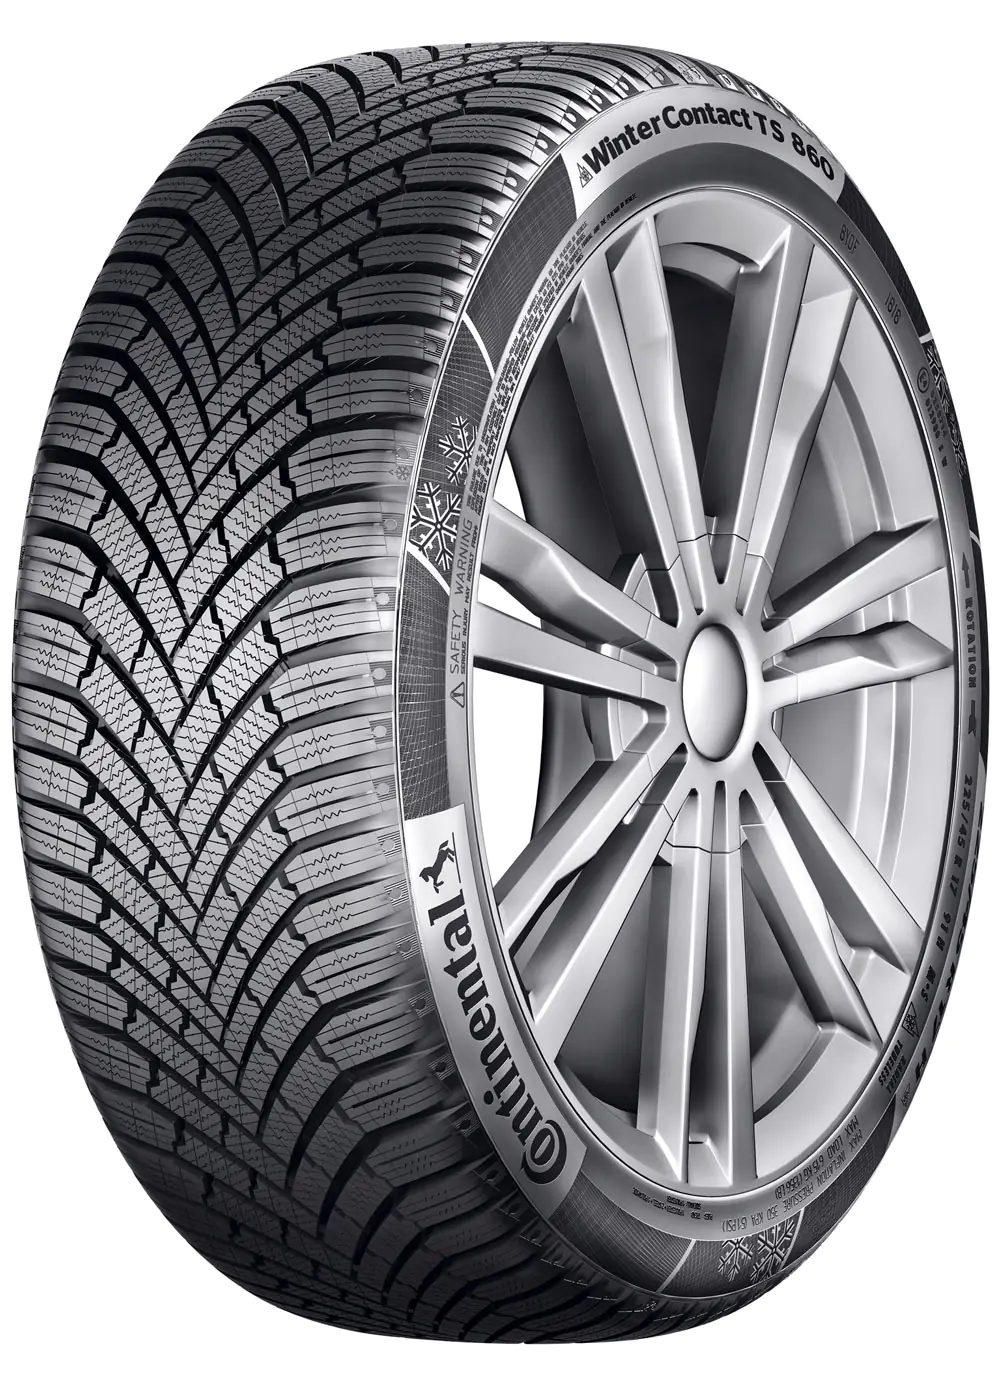 Gomme Autovettura Continental 195/70 R16 94H WinterContact TS 870 M+S Invernale